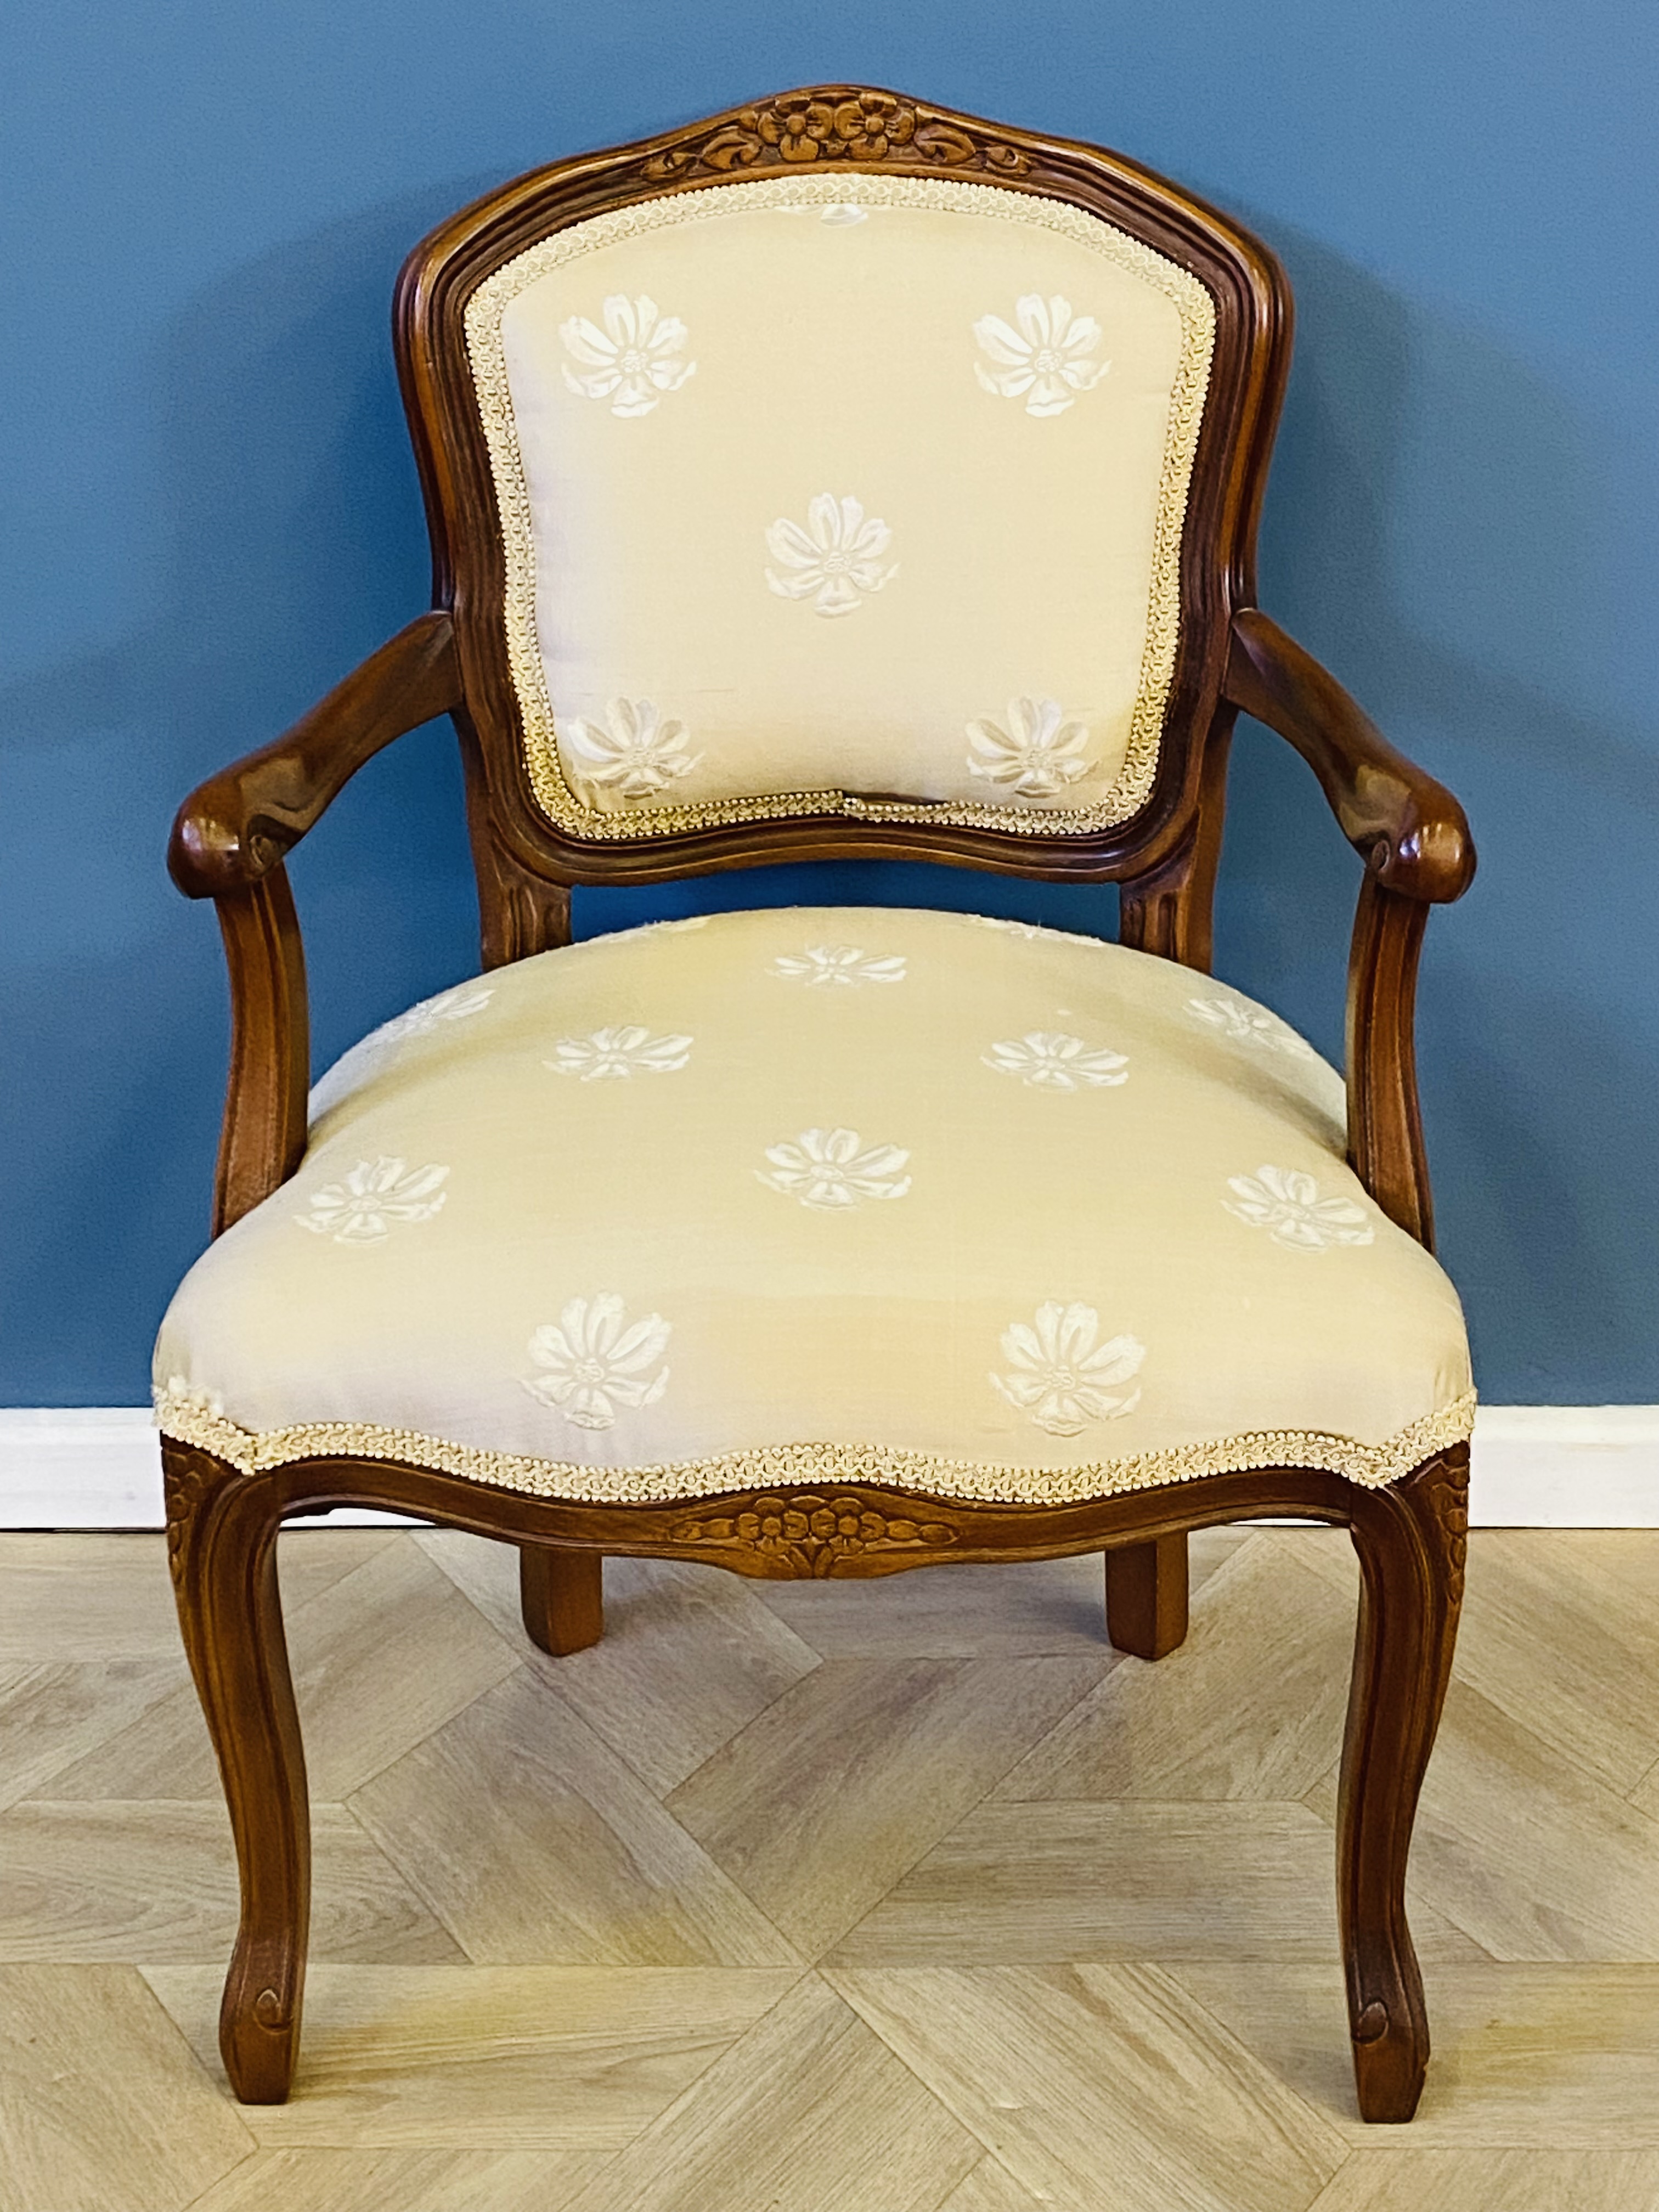 Pair of reproduction French style upholstered elbow chairs - Image 3 of 7